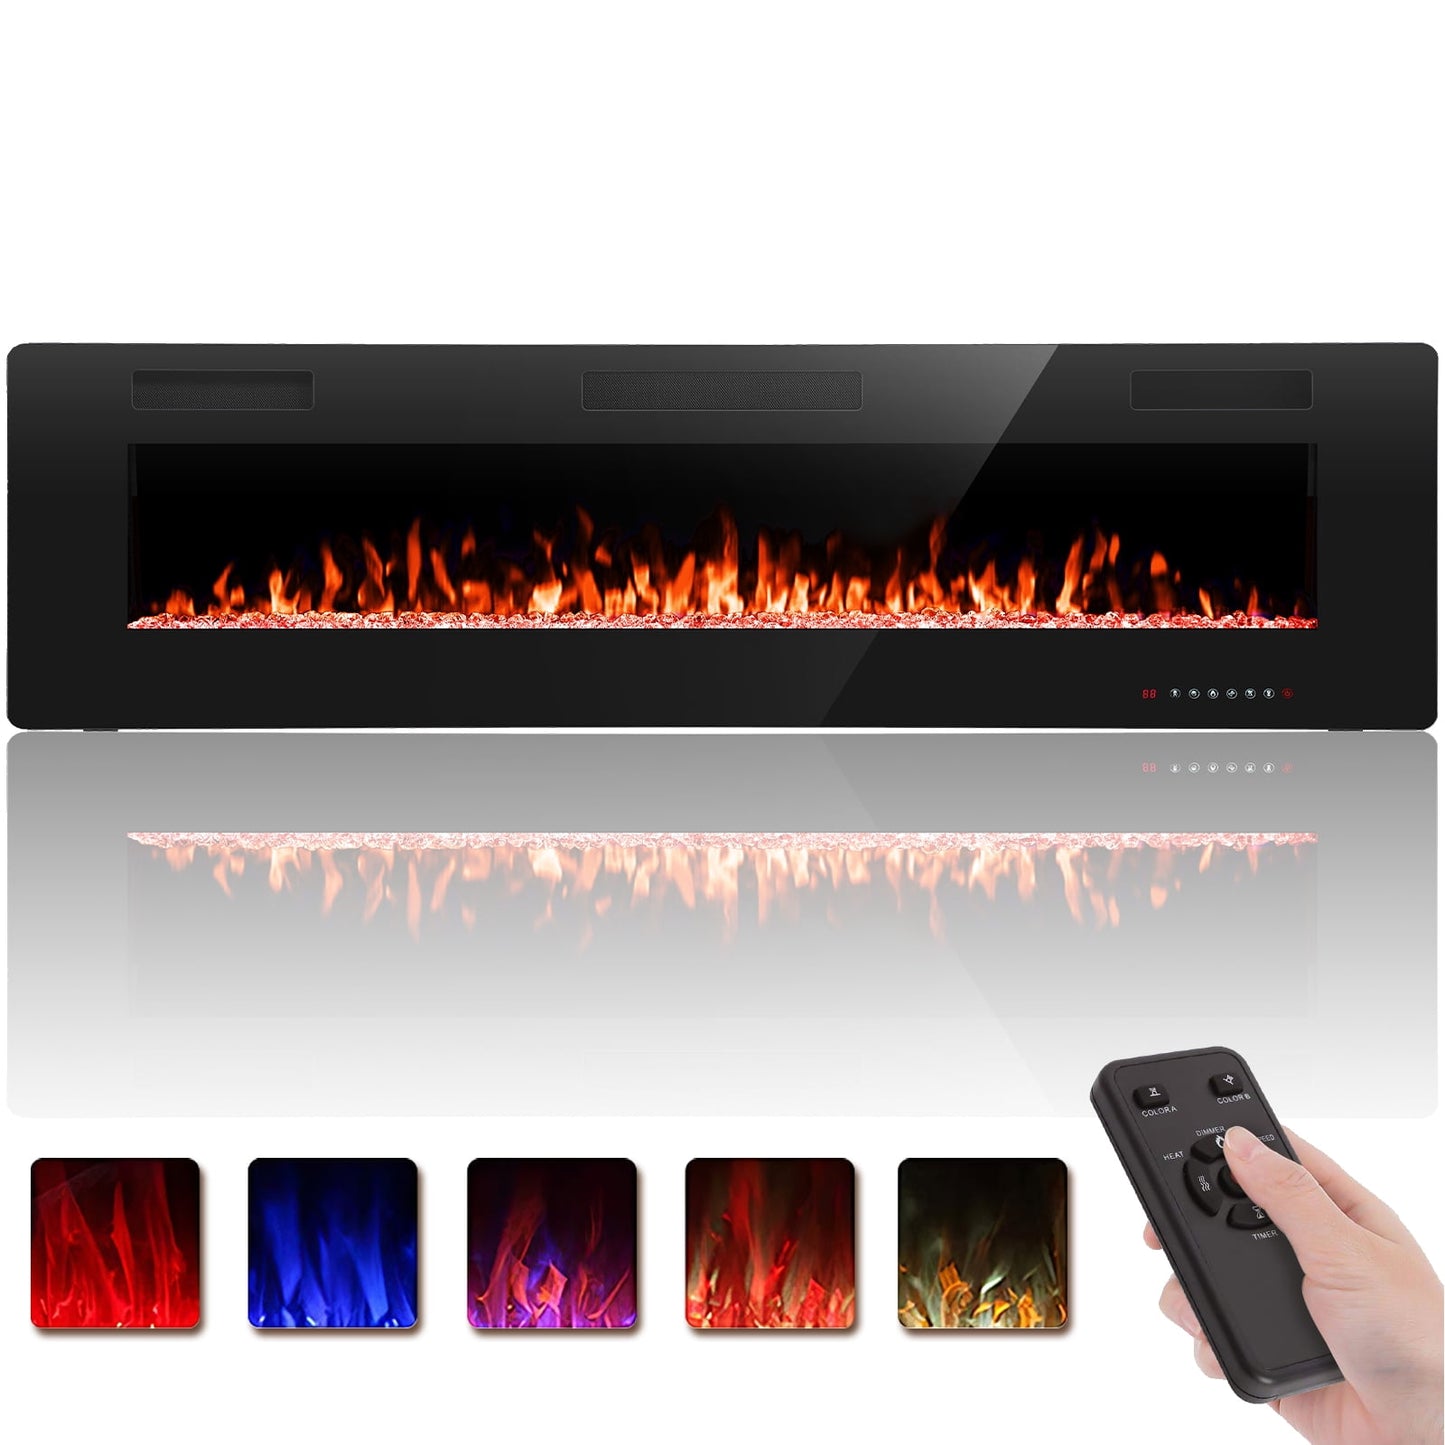 KISSAIR 68" Electric Fireplace in-Wall Recessed and Wall Mounted 1500W Fireplace Heater and Linear Fireplace with Timer/Multicolor Flames/Touch Screen/Remote Control (Black)